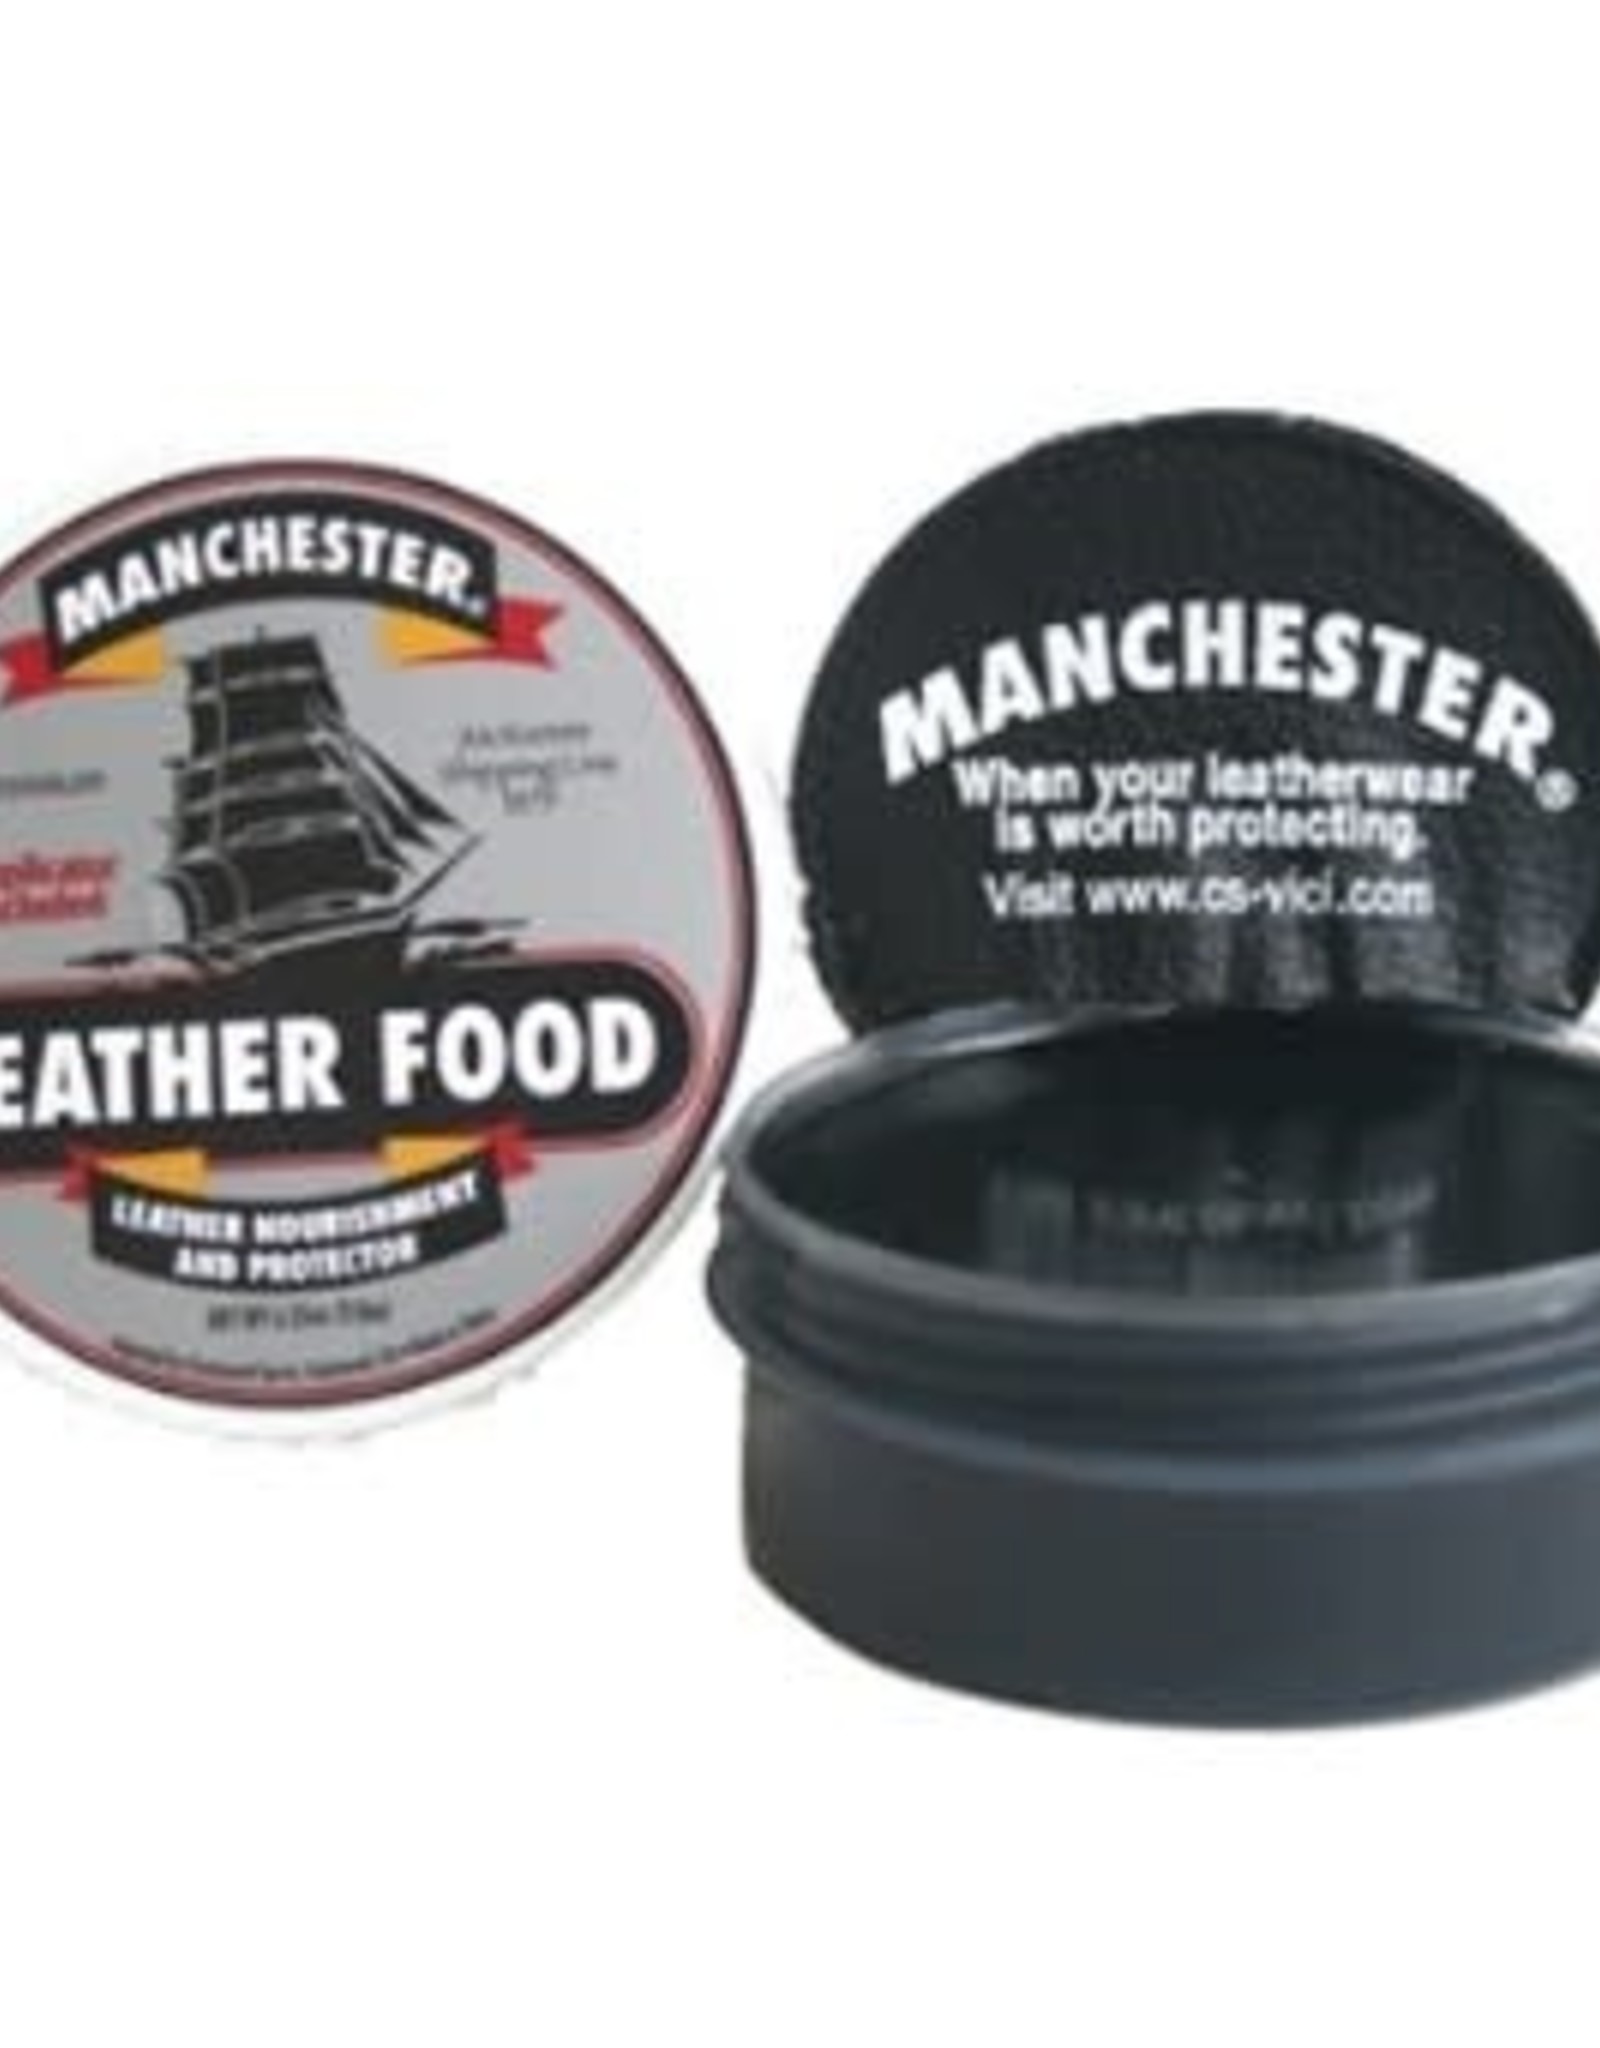 Manchester Manchester Leather Food Black